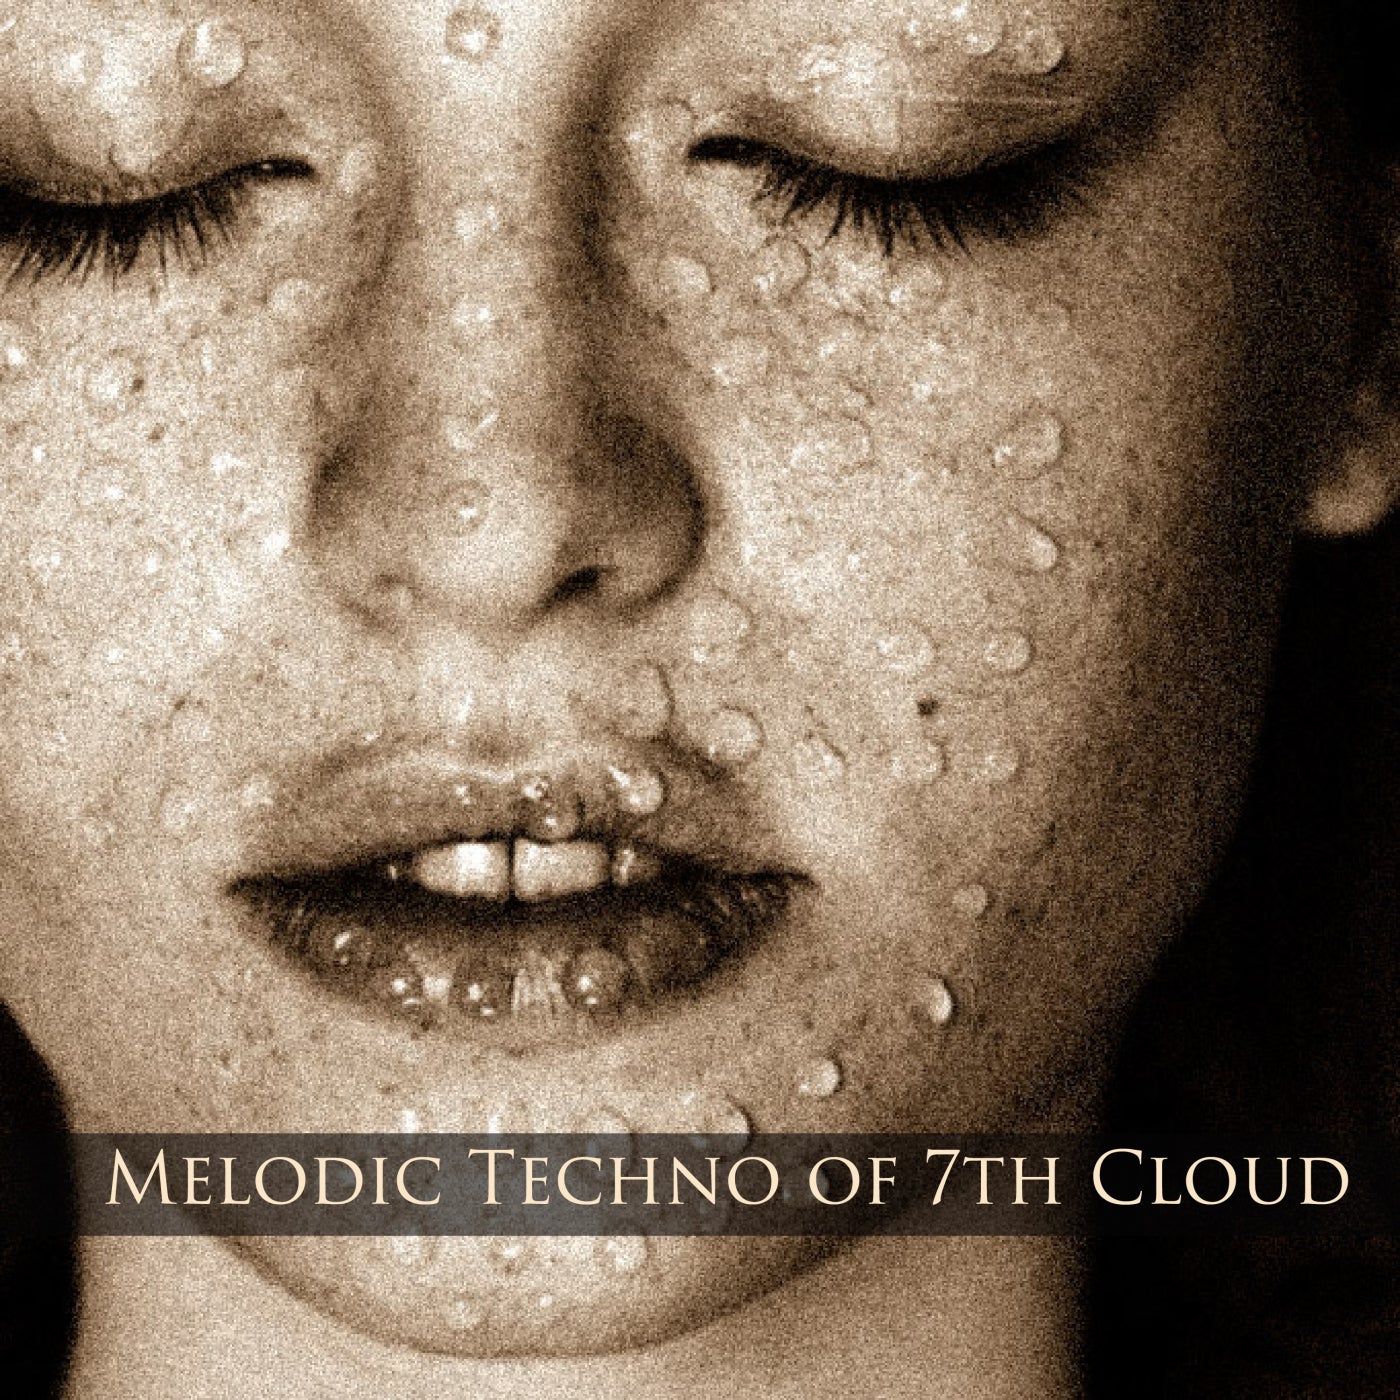 Melodic Techno of 7th Cloud